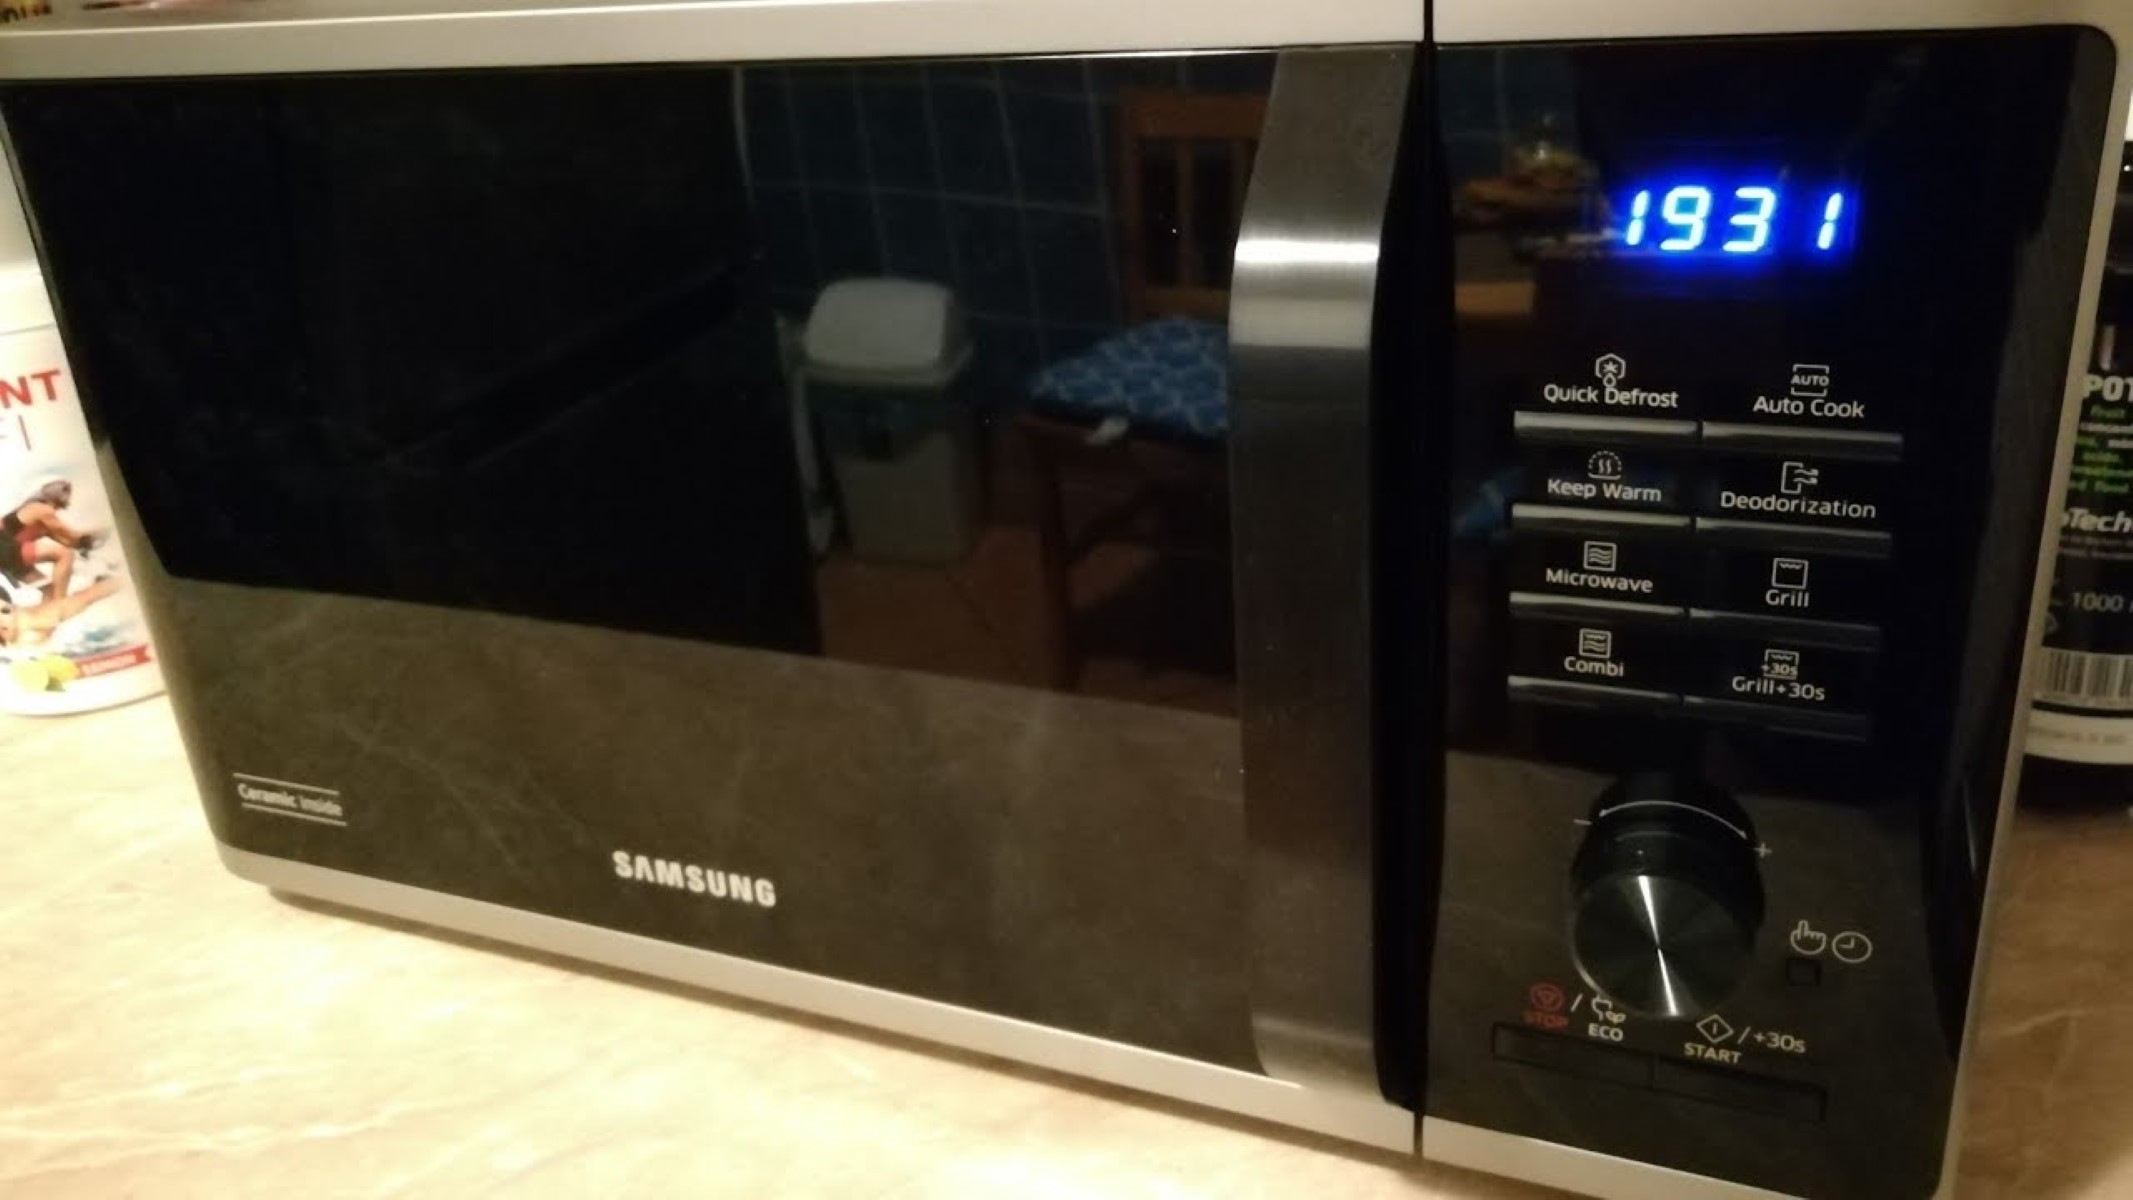 How To Fix The Error Code E-27 For Samsung Convection Oven